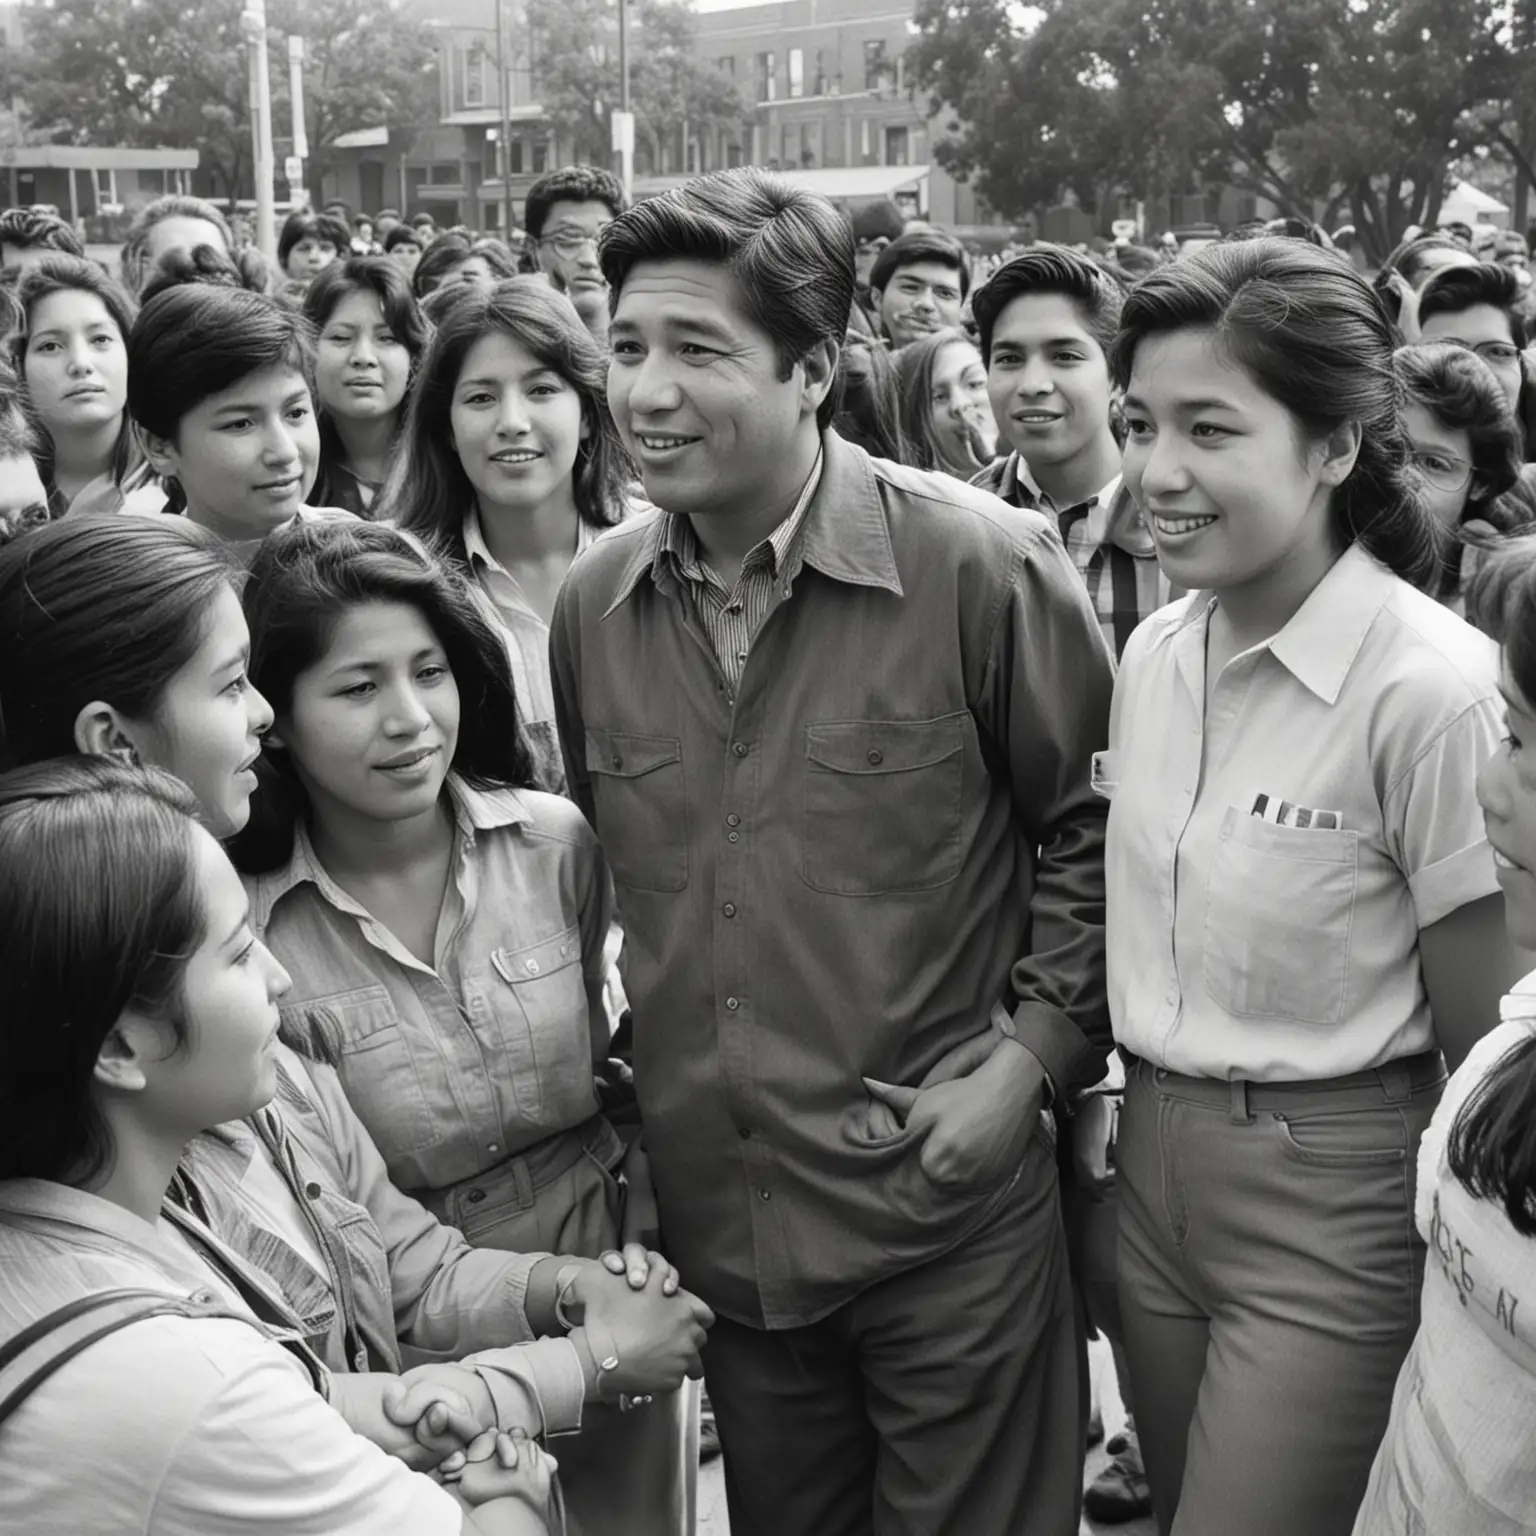 cesar chavez with multi-ethnic students